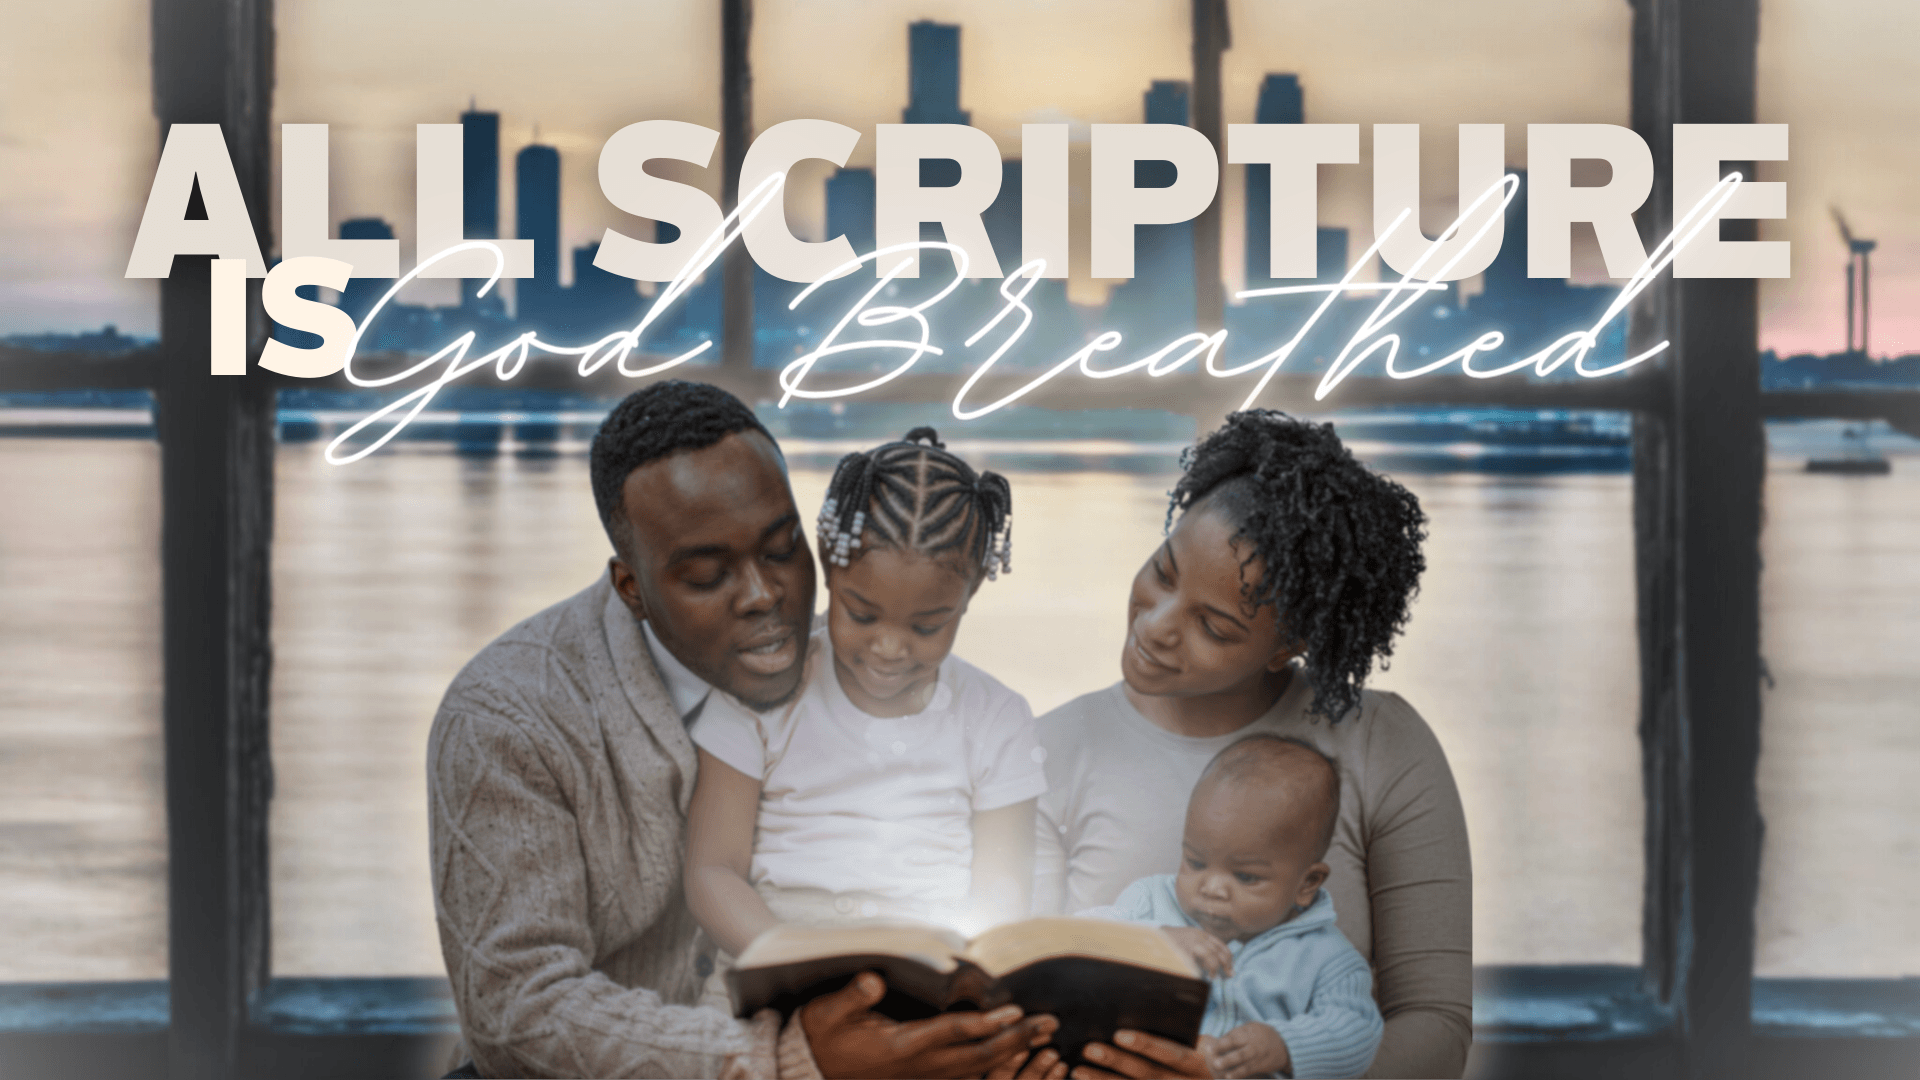 All Scripture is God-Breathed